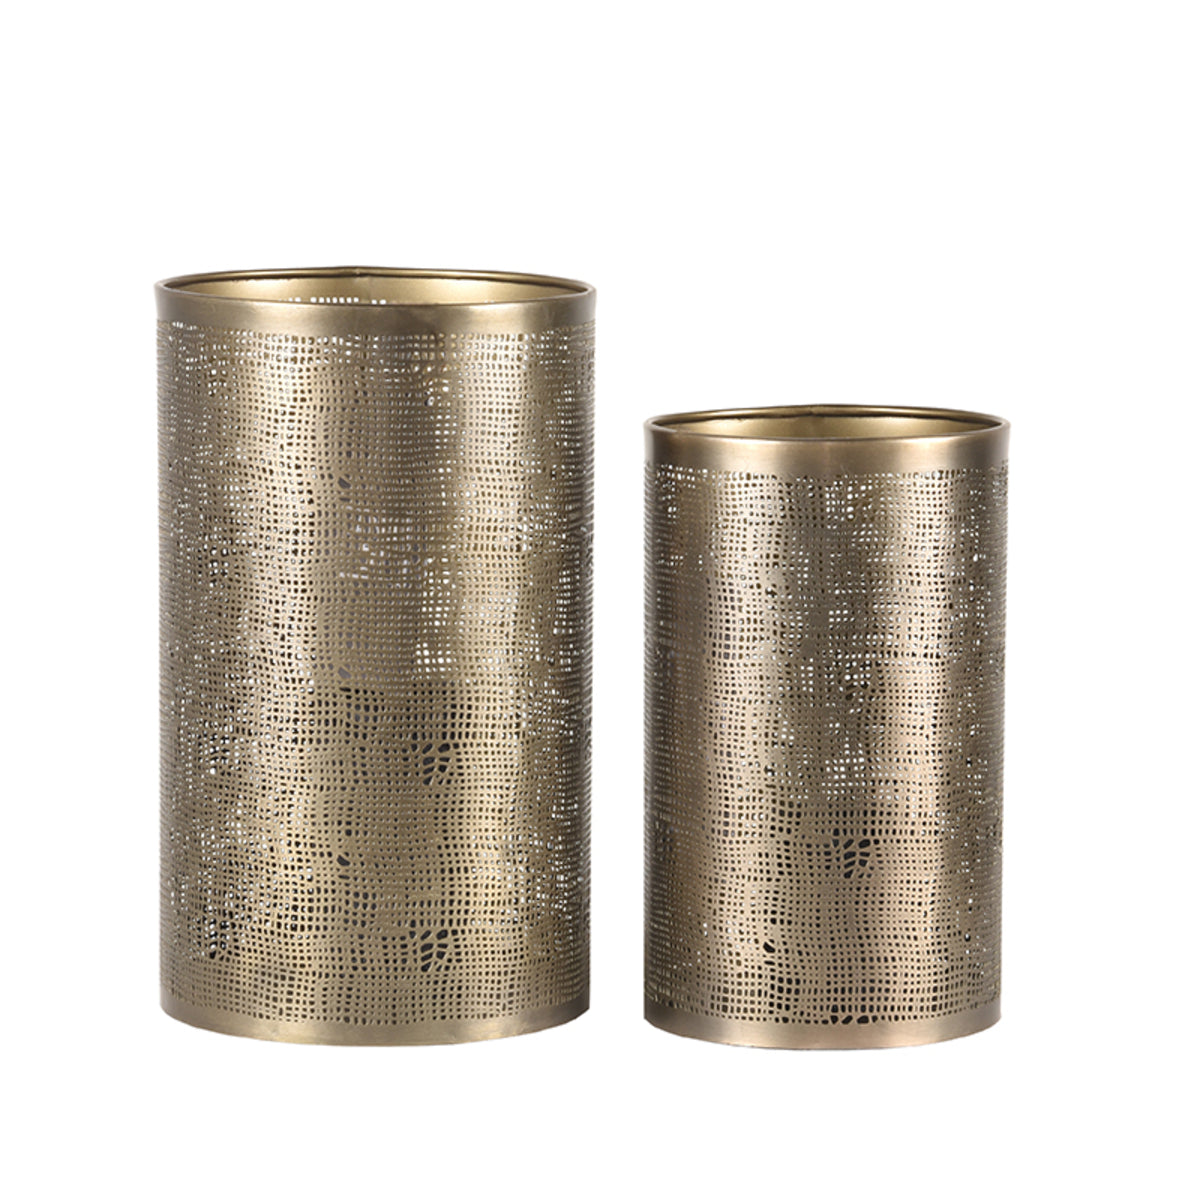 LABEL51 Candle holders - Antique gold - Metal - L